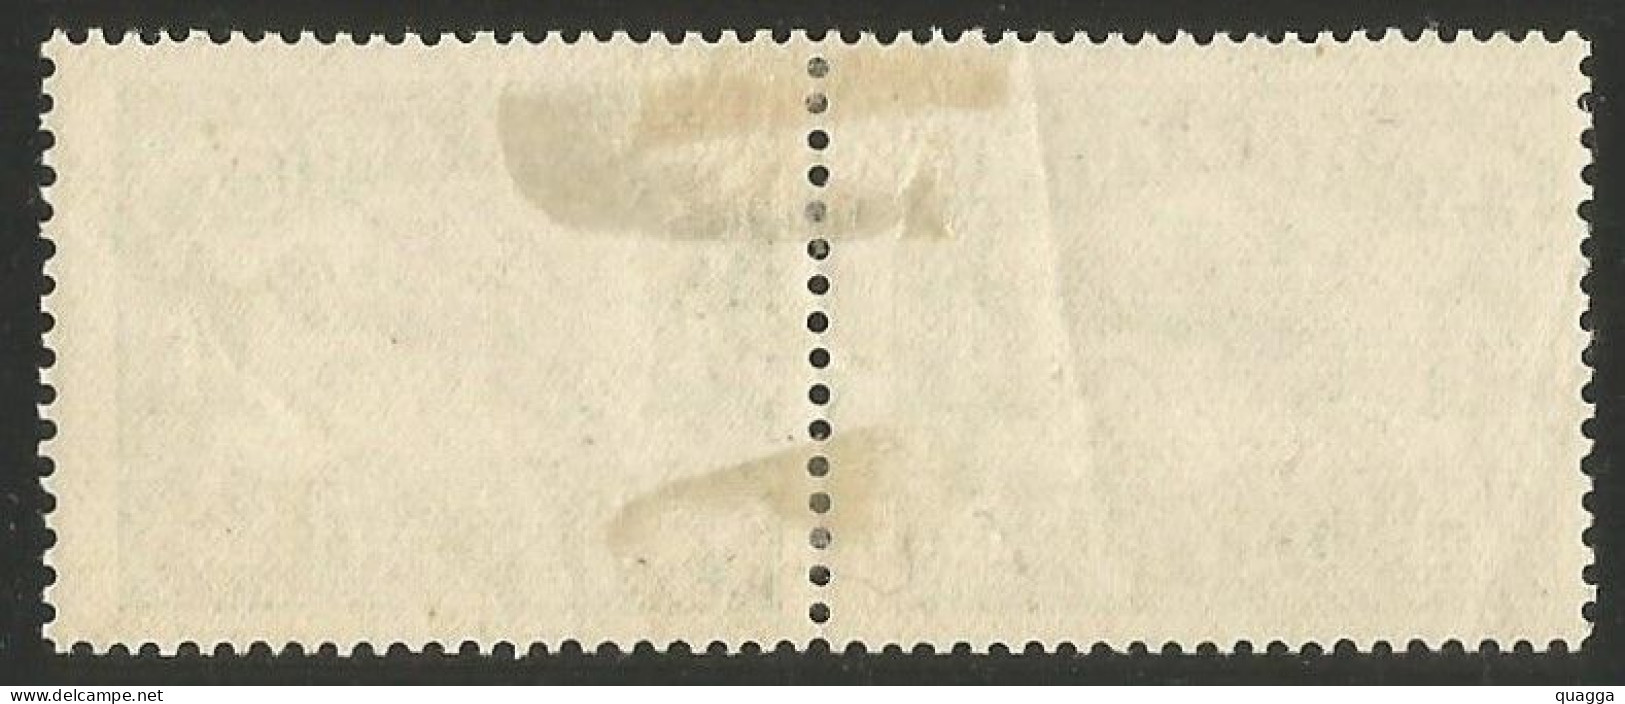 South Africa 1929. 4d Green Showing Short 'I' In 'AIR'. (UHB 20 V2). SACC 40*, SG 40*. - Neufs